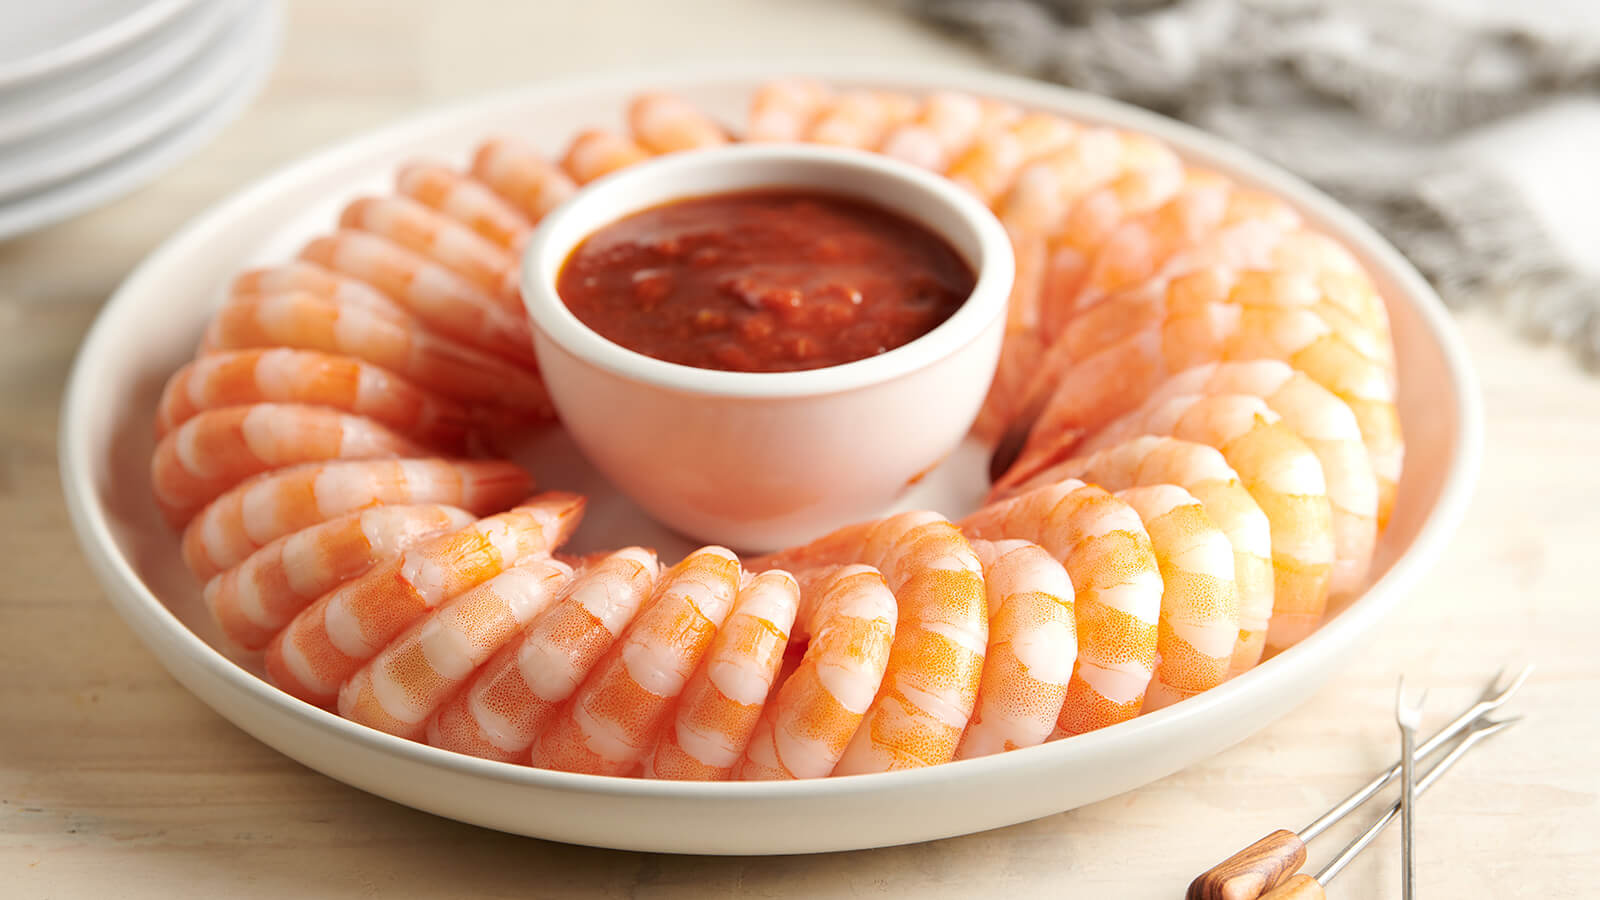 http://images.ctfassets.net/lufu0clouua1/5UPABLS5RR3svVTQv3N6gL/f3f5ee973fdc2c87137b149c2d3575f2/TFM-Cocktail-Shrimp-with-Cocktail-Sauce-beauty.jpg